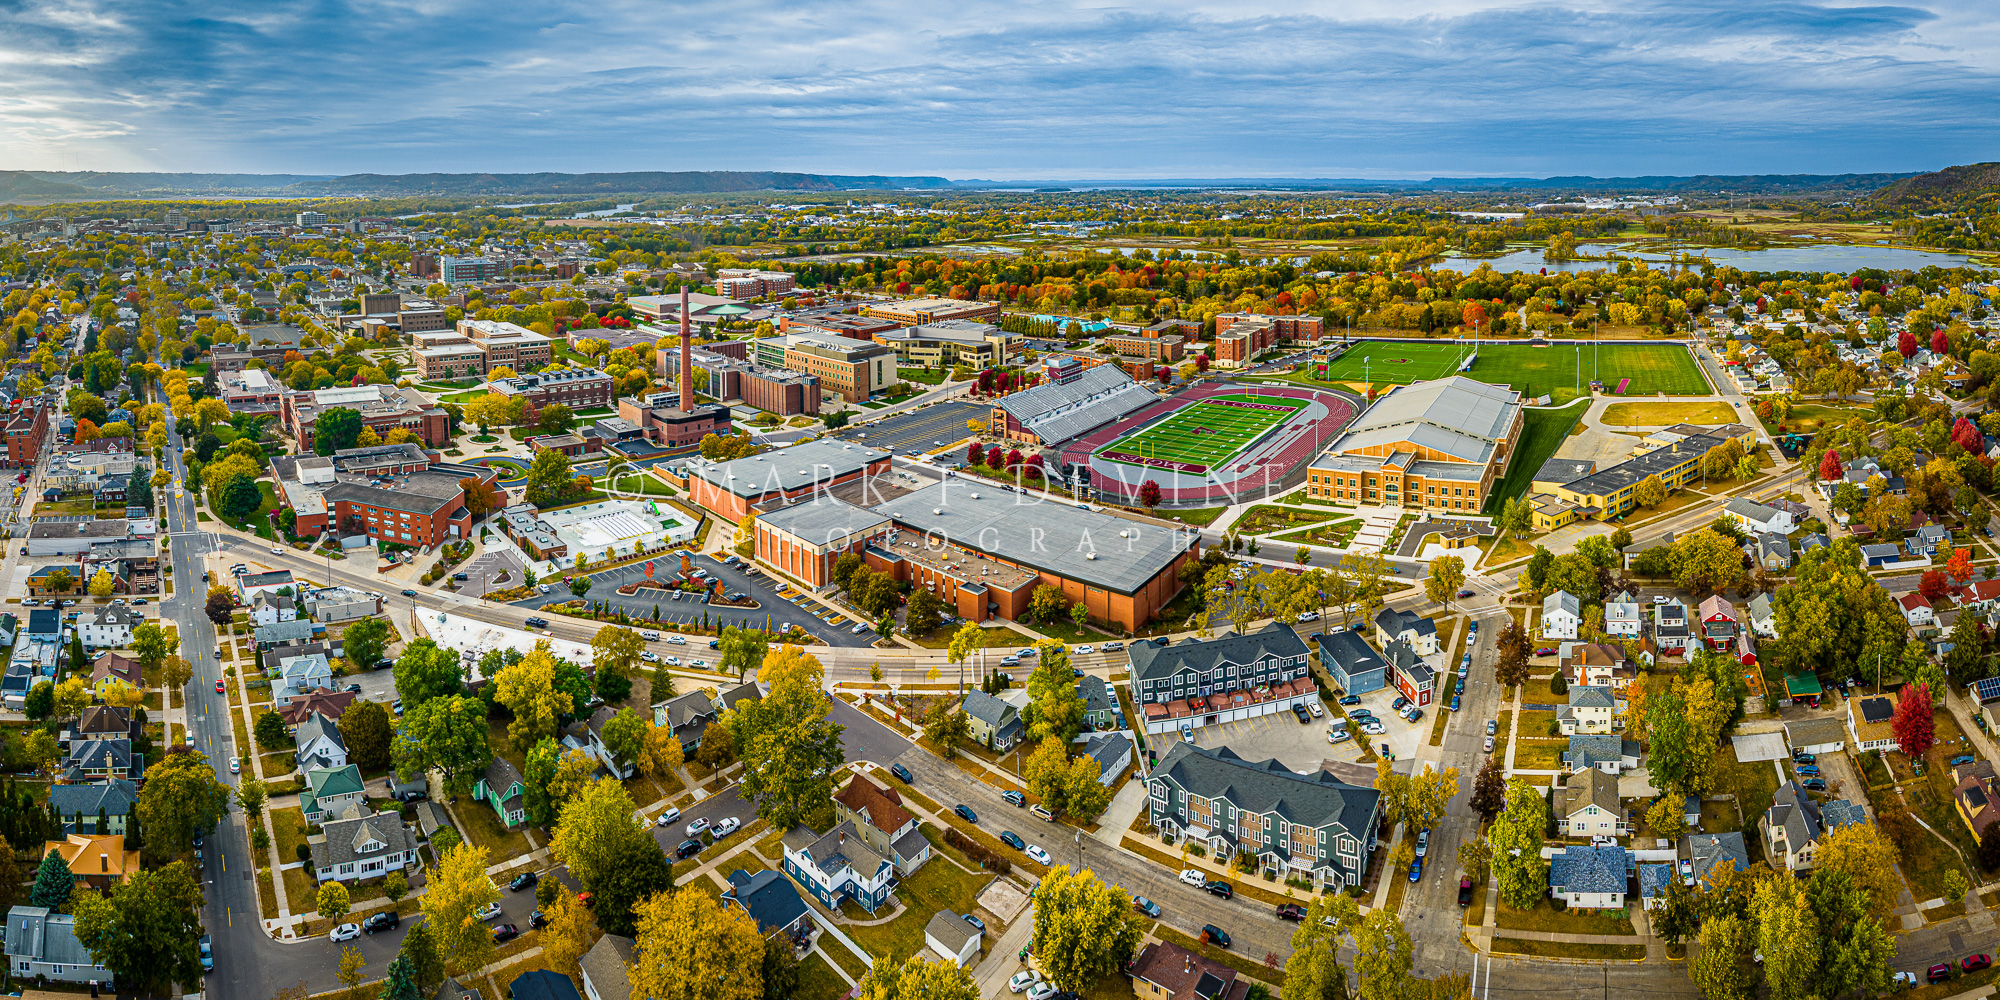 Autumn afternoon at the UW-La Crosse campus.  View is looking northwest with Campbell Road and Mitchell Hall in the foreground...